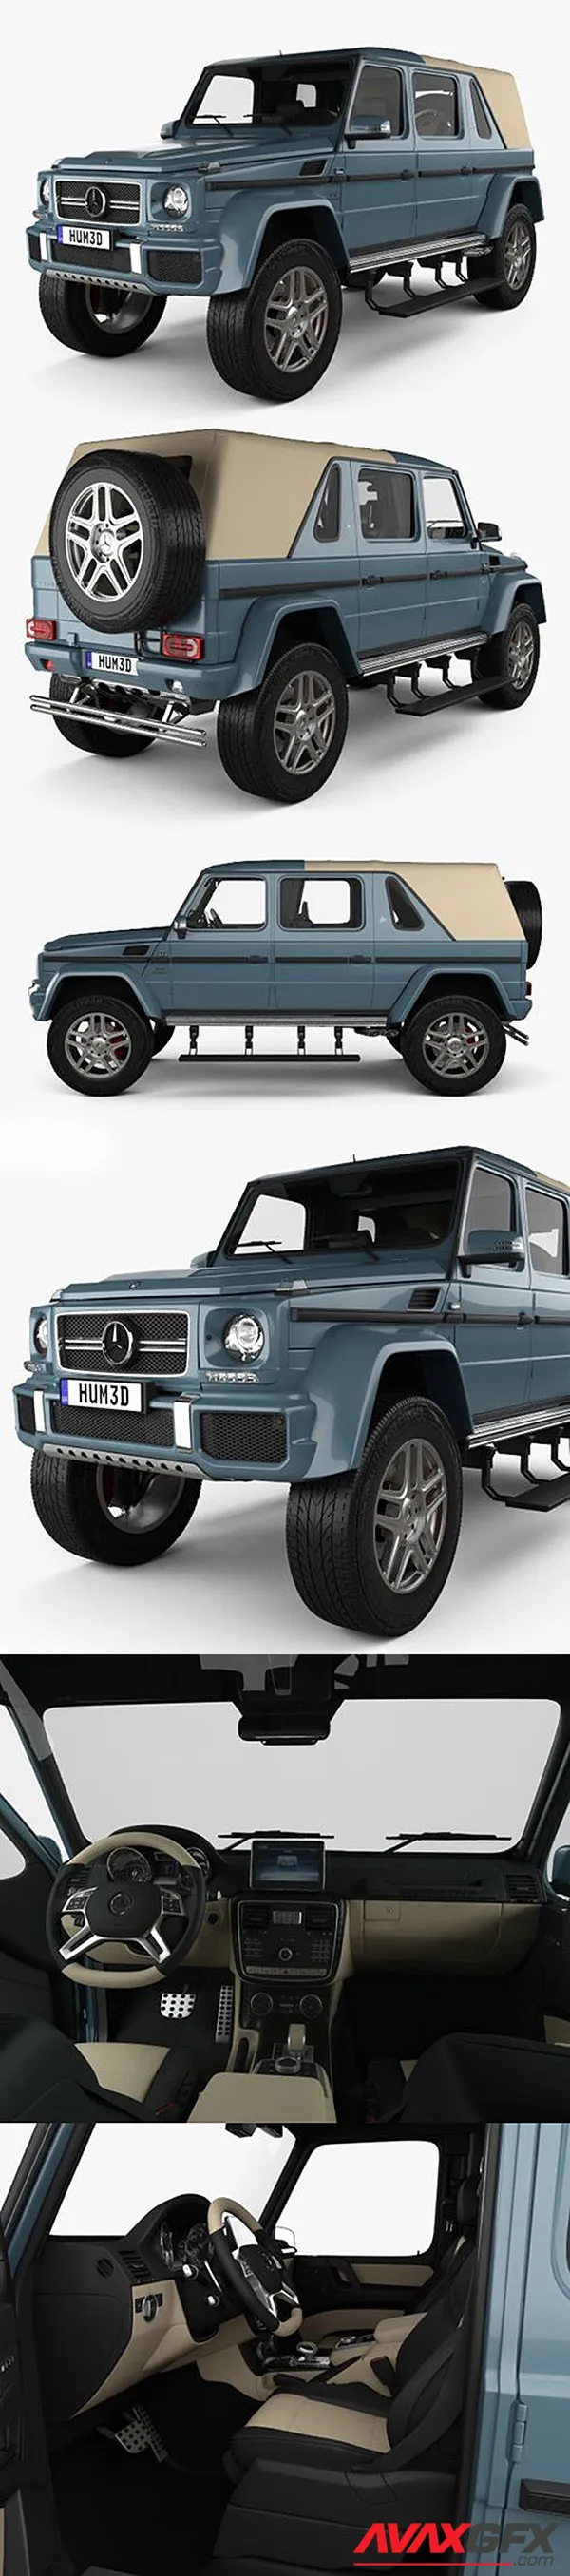 Mercedes-Benz G-class W463 Maybach Landaulet with HQ interior 2017 3D Model